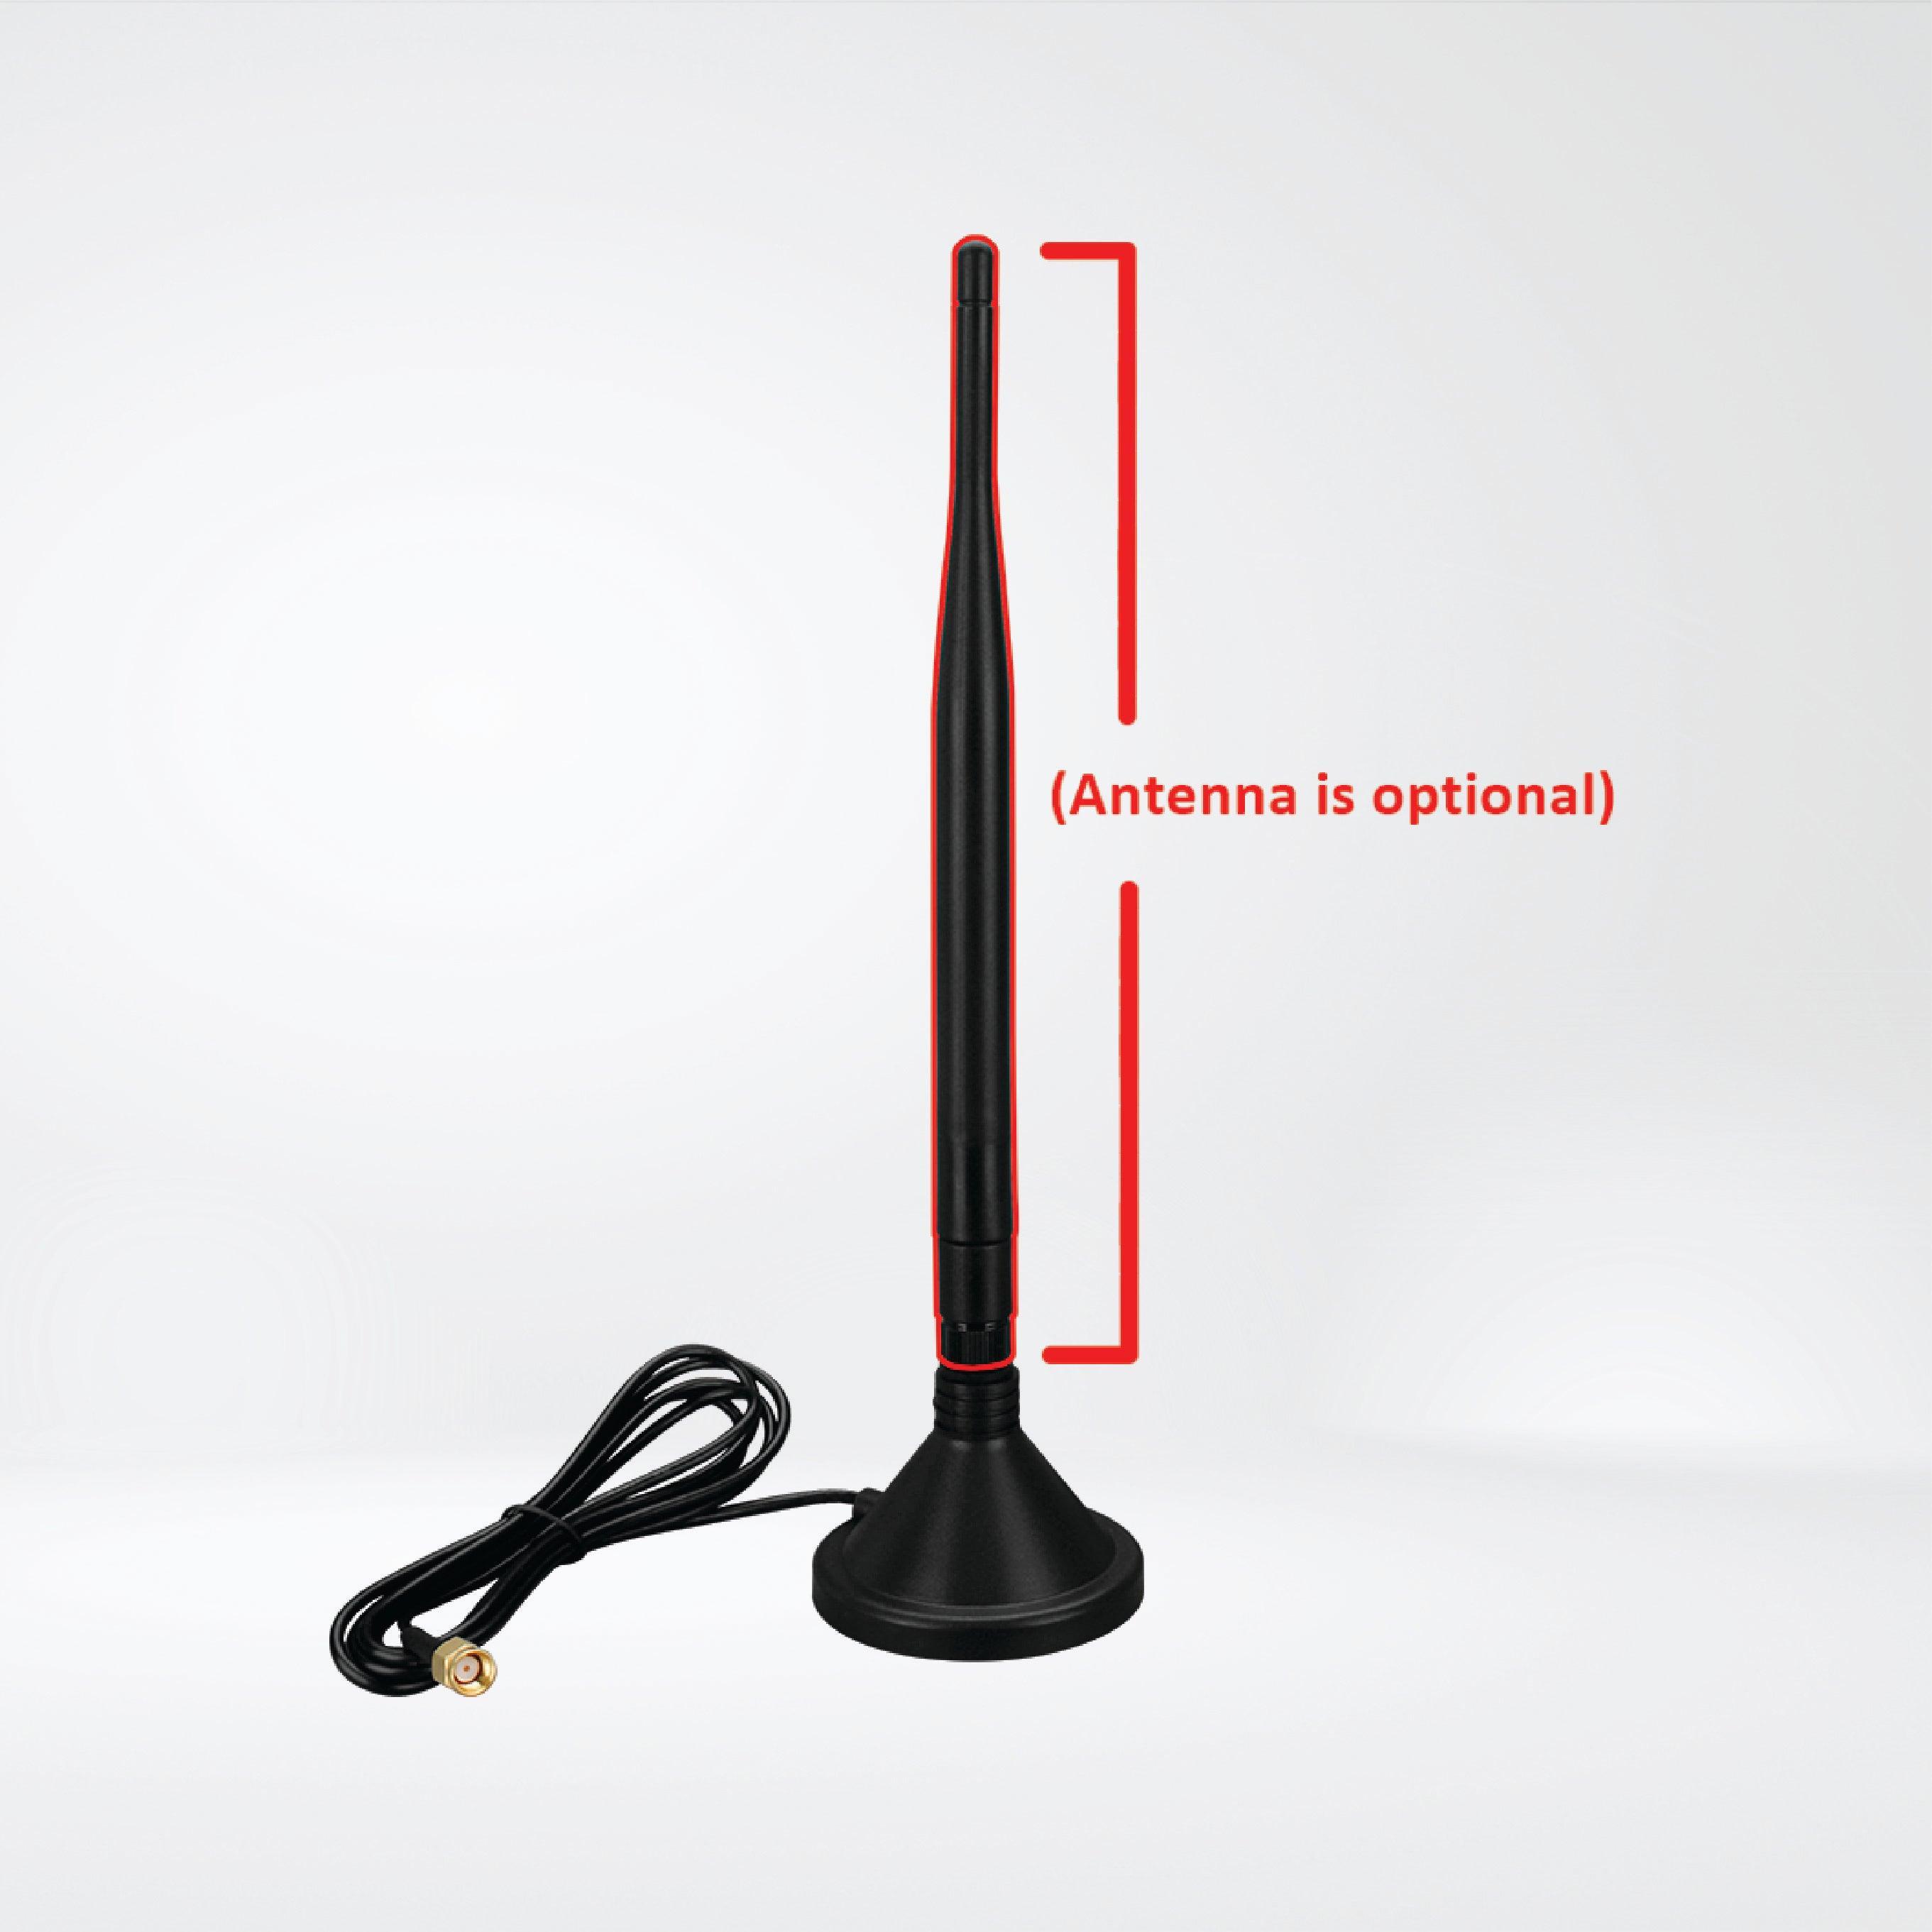 ANT-Base-02 Antenna magnetic base with 1.5M cable (RP-SMA Male Plug) - Riverplus